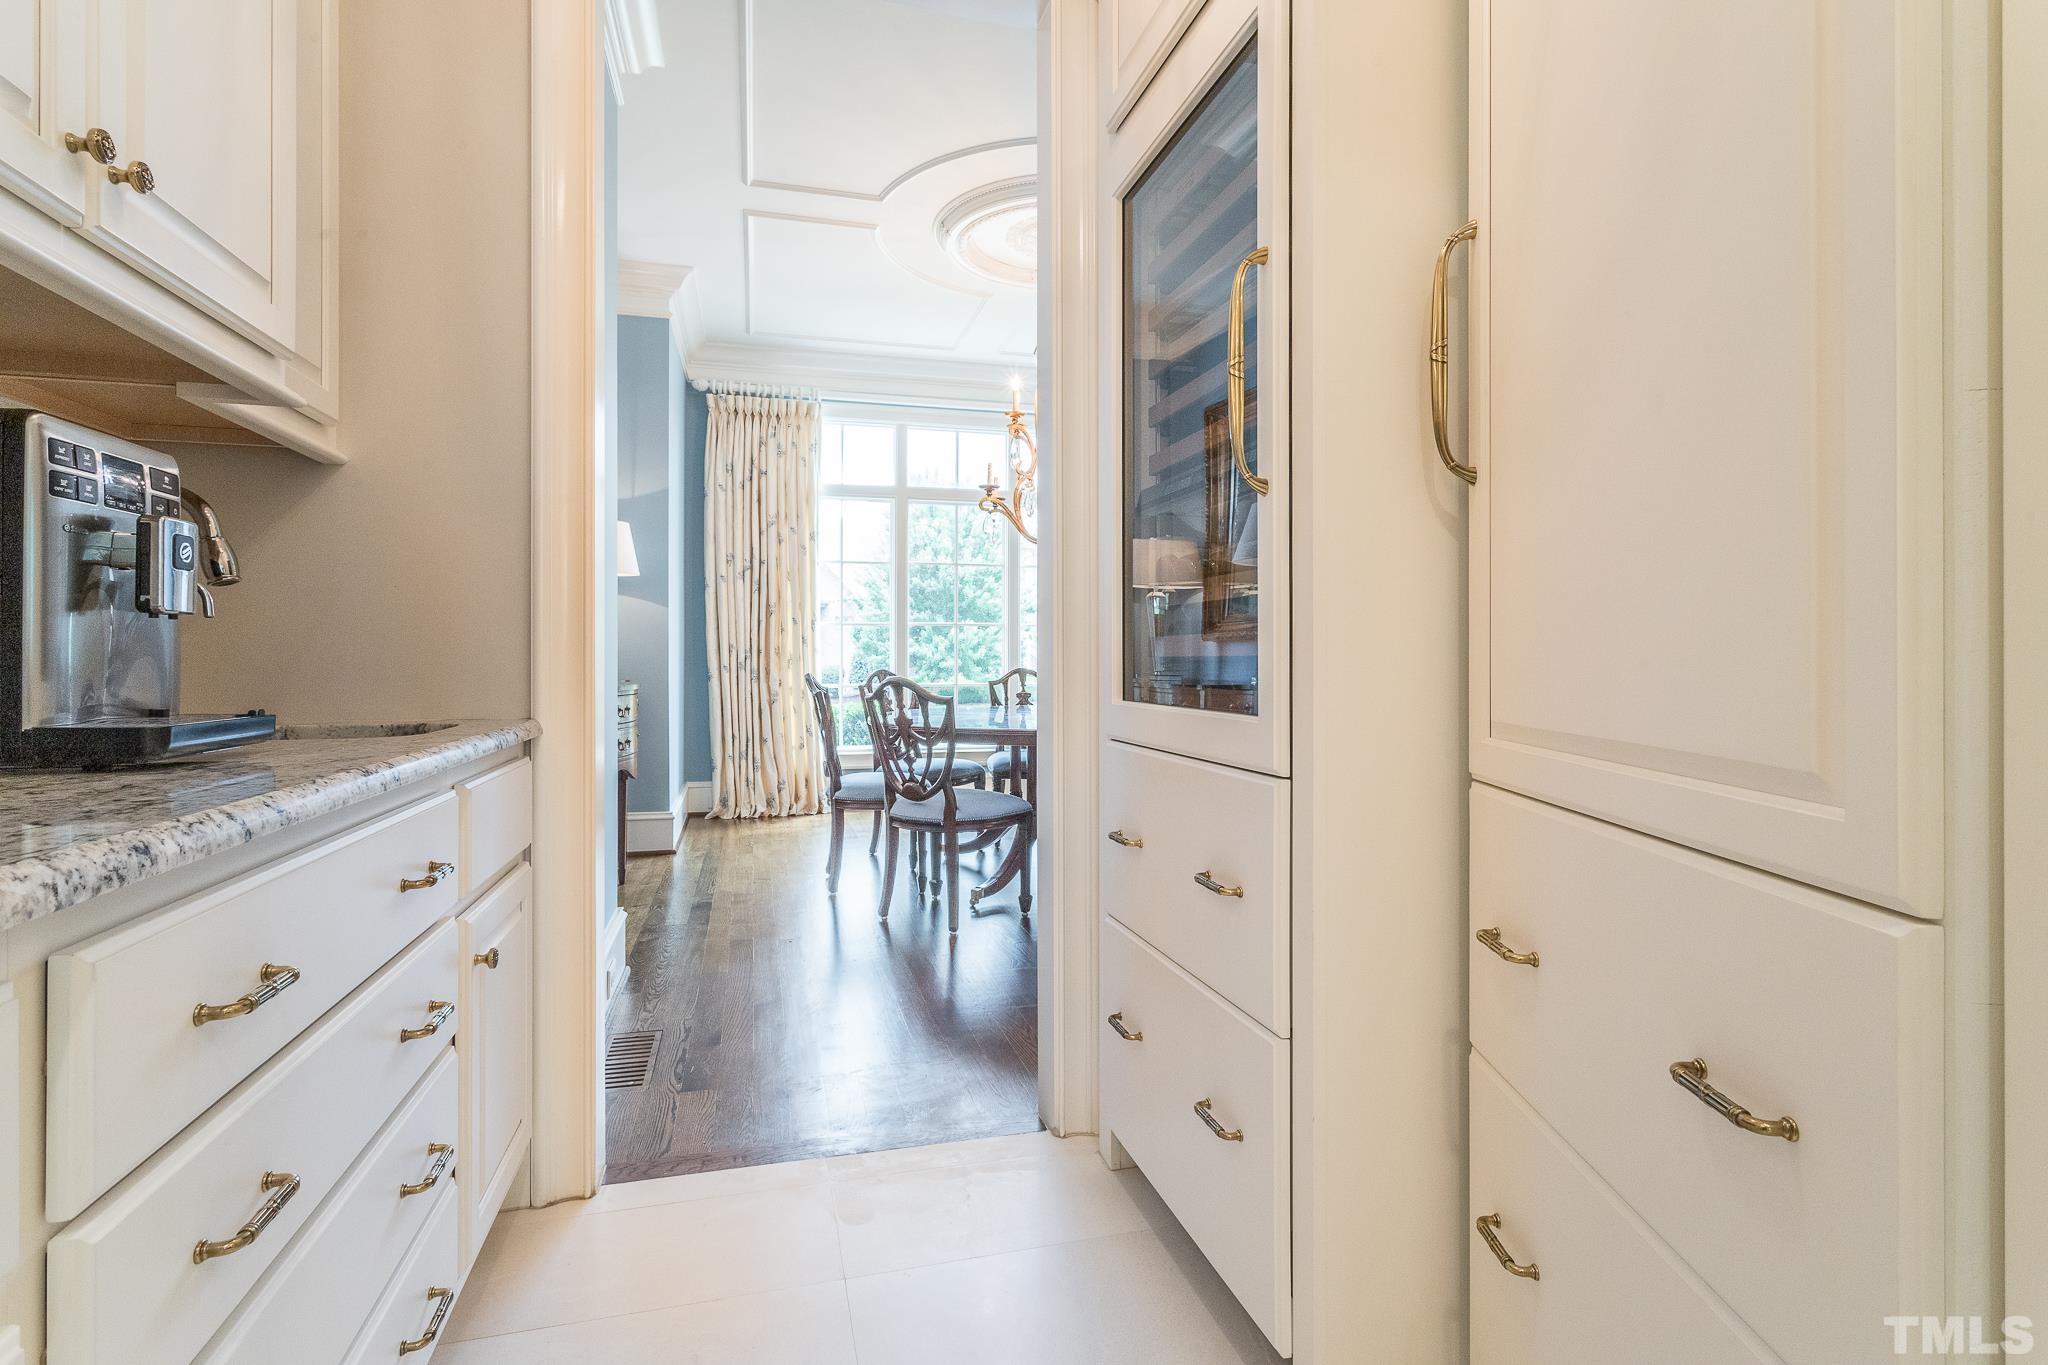 One of the cabinets is a door to your hidden walk-in pantry!